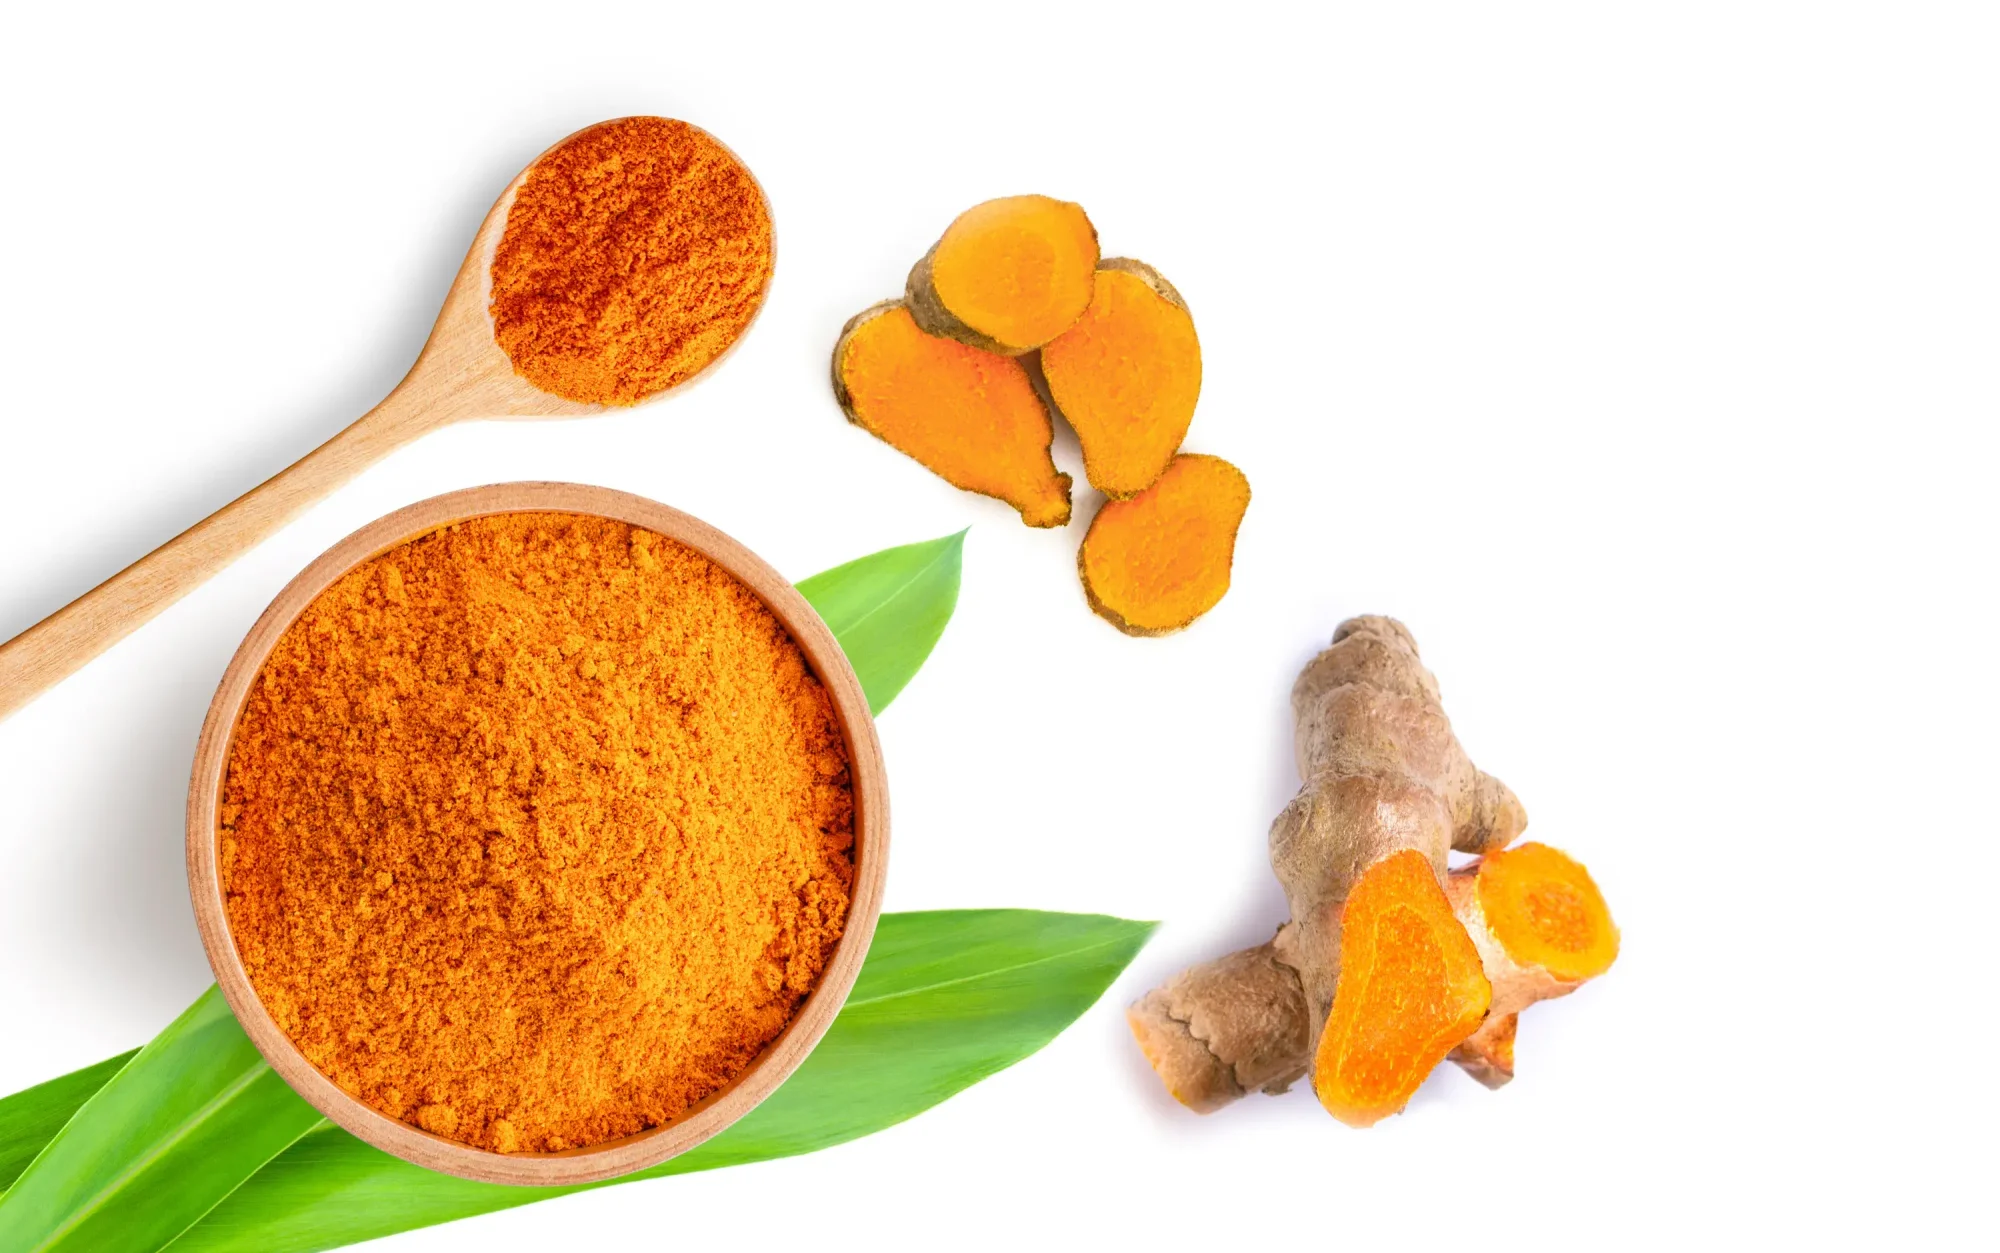 Turmeric powder (curcumin, Curcuma longa Linn) in a wooden bowl and spoon with turmeric isolated on white background. Top view. Flat lay.